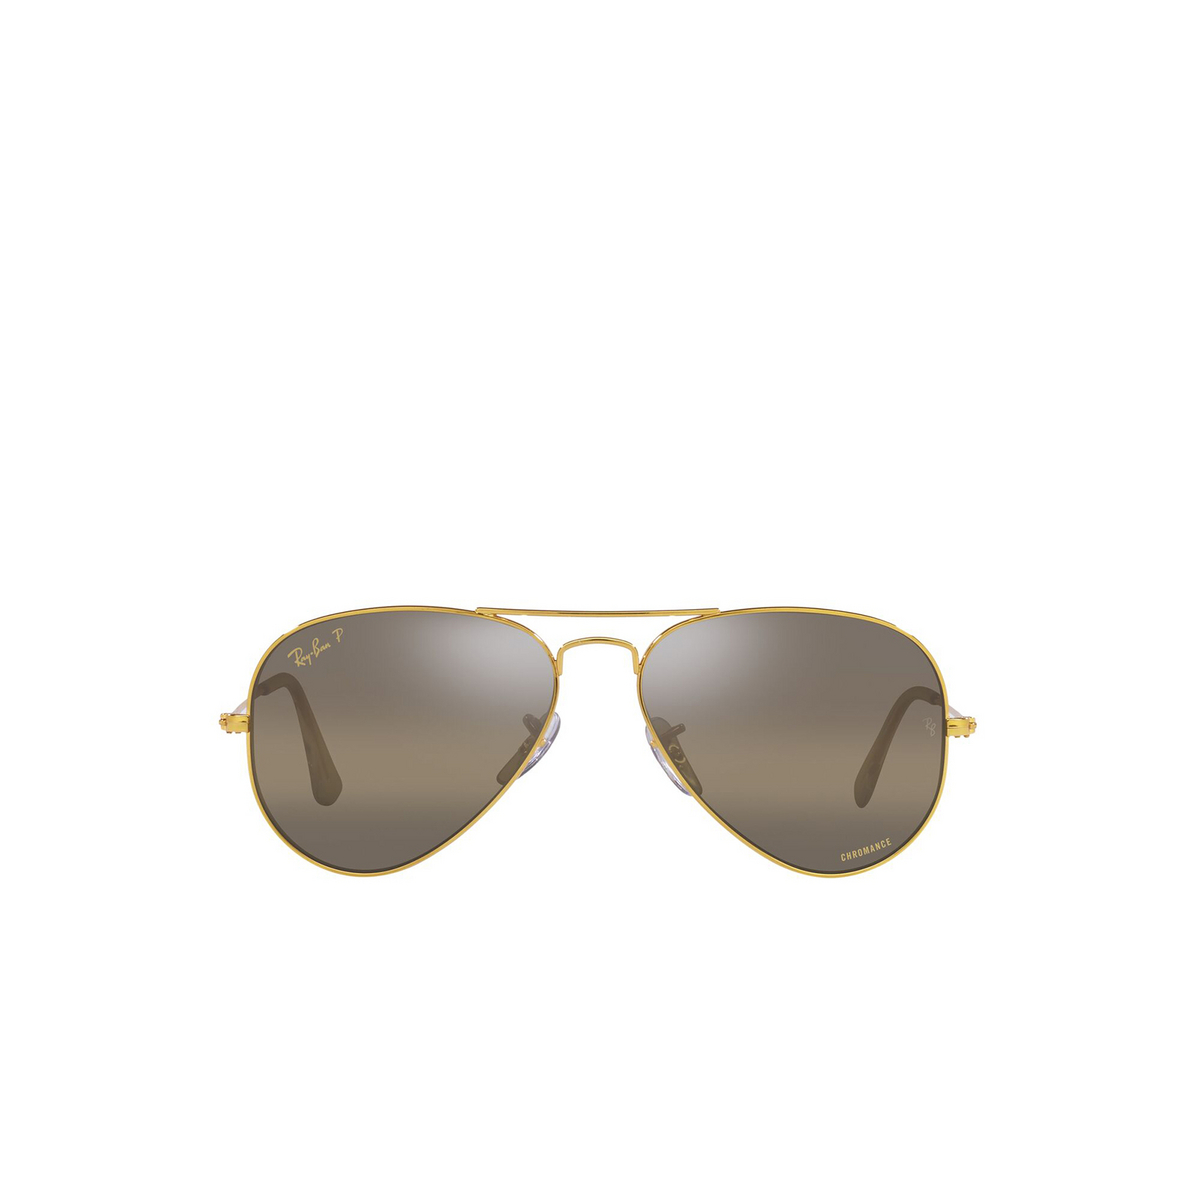 Ray-Ban AVIATOR LARGE METAL Sunglasses 9196G5 Legend Gold - front view